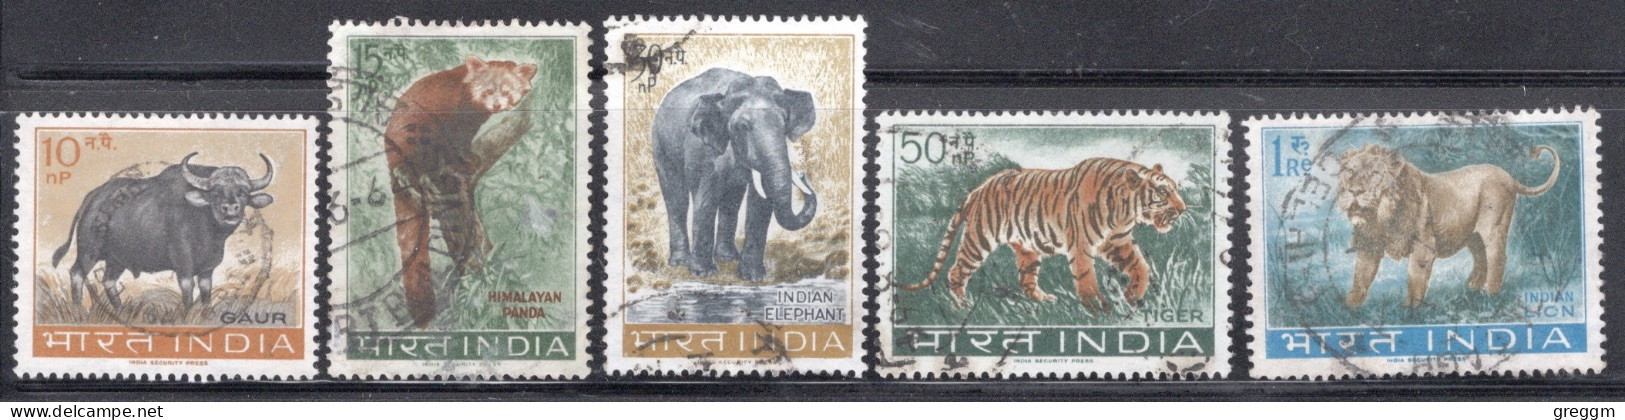 India 1963 Set Of Stamps To Celebrate Wildlife Conservation In Fine Used - Usati